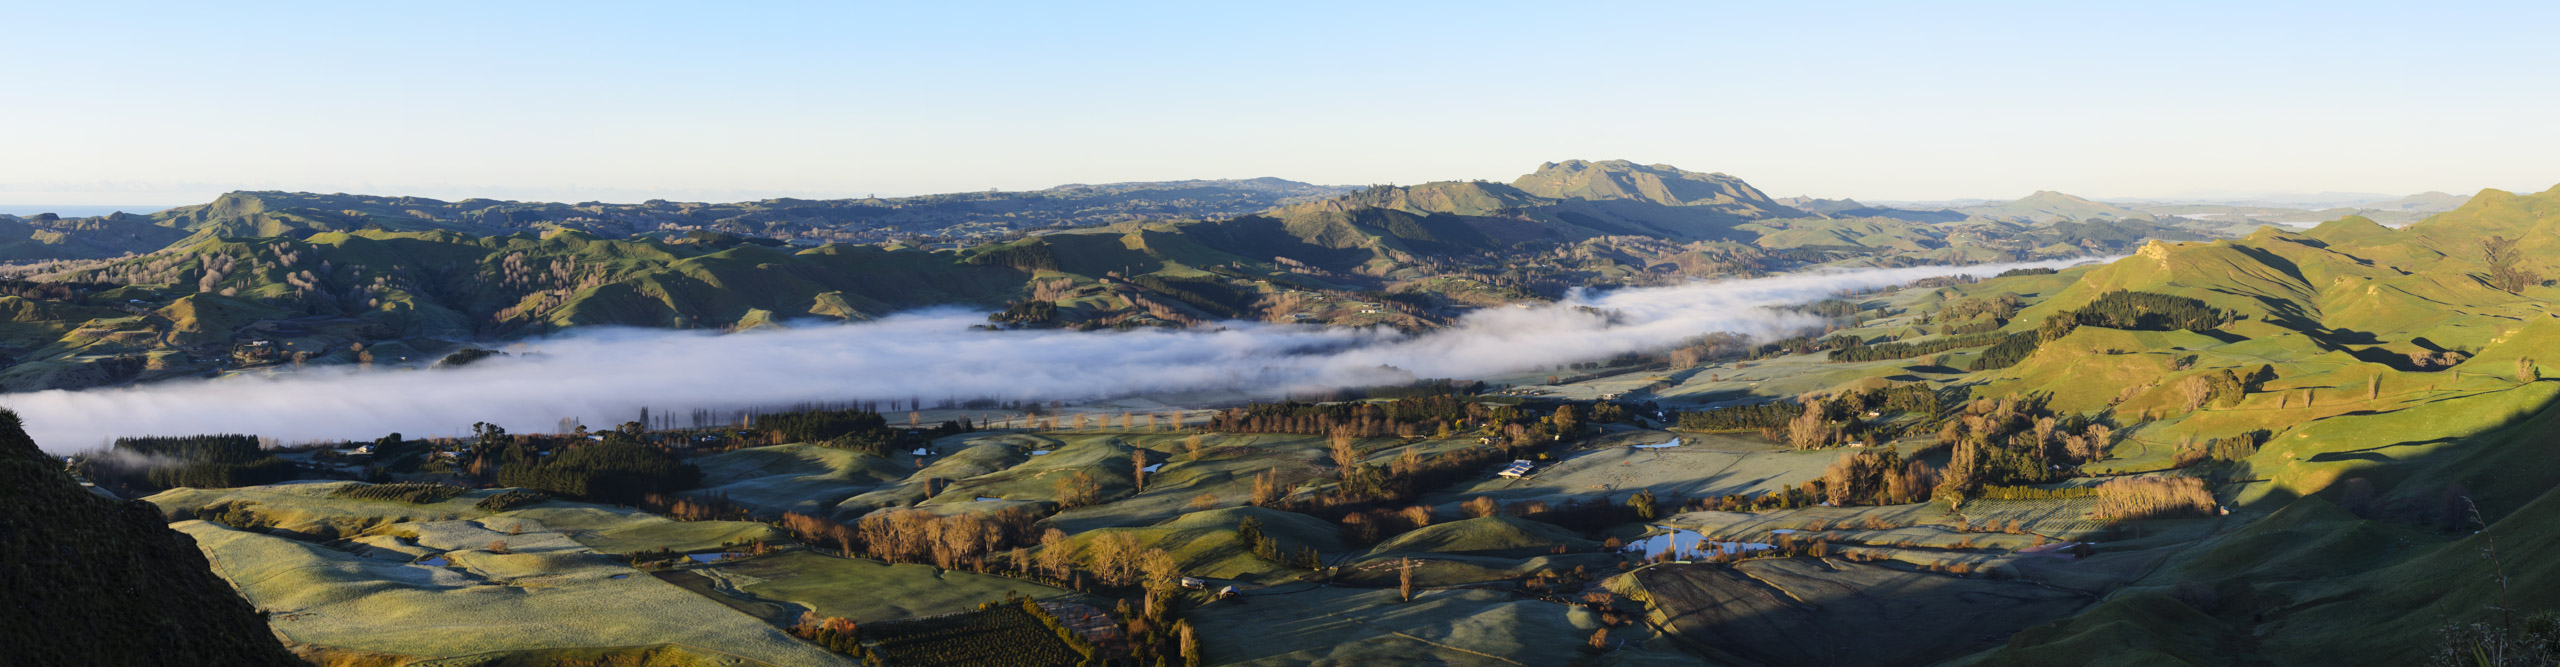 Misty clouds over Te mata, at sunset in the Hawkes Bay region, North Island, New Zealand